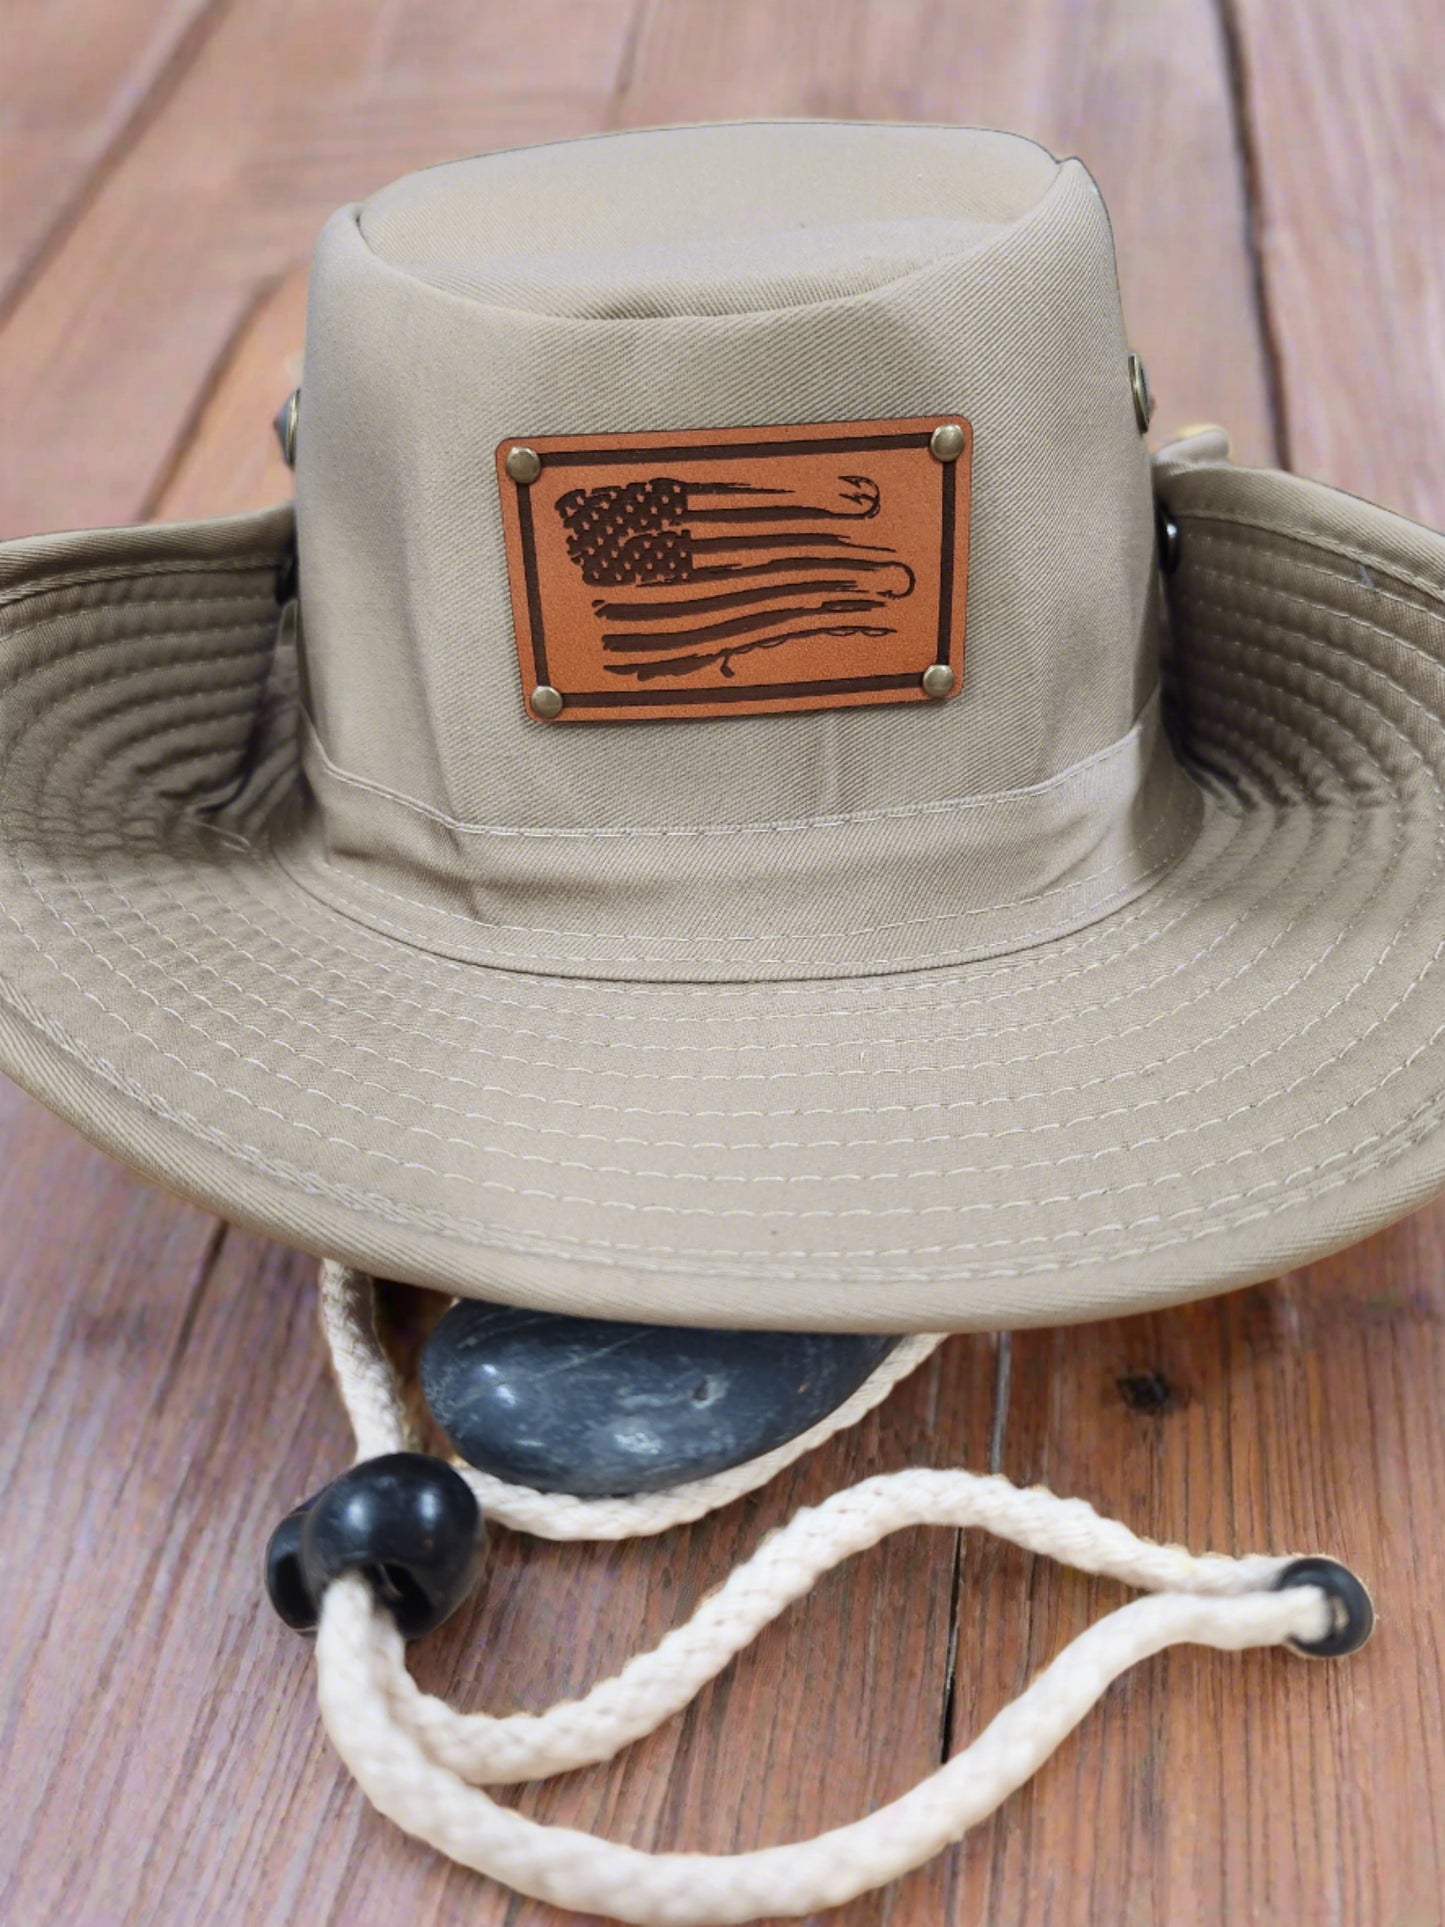 USA FLAG Fishing pole Boonie hat - Adjustable Outback hat with neck protection